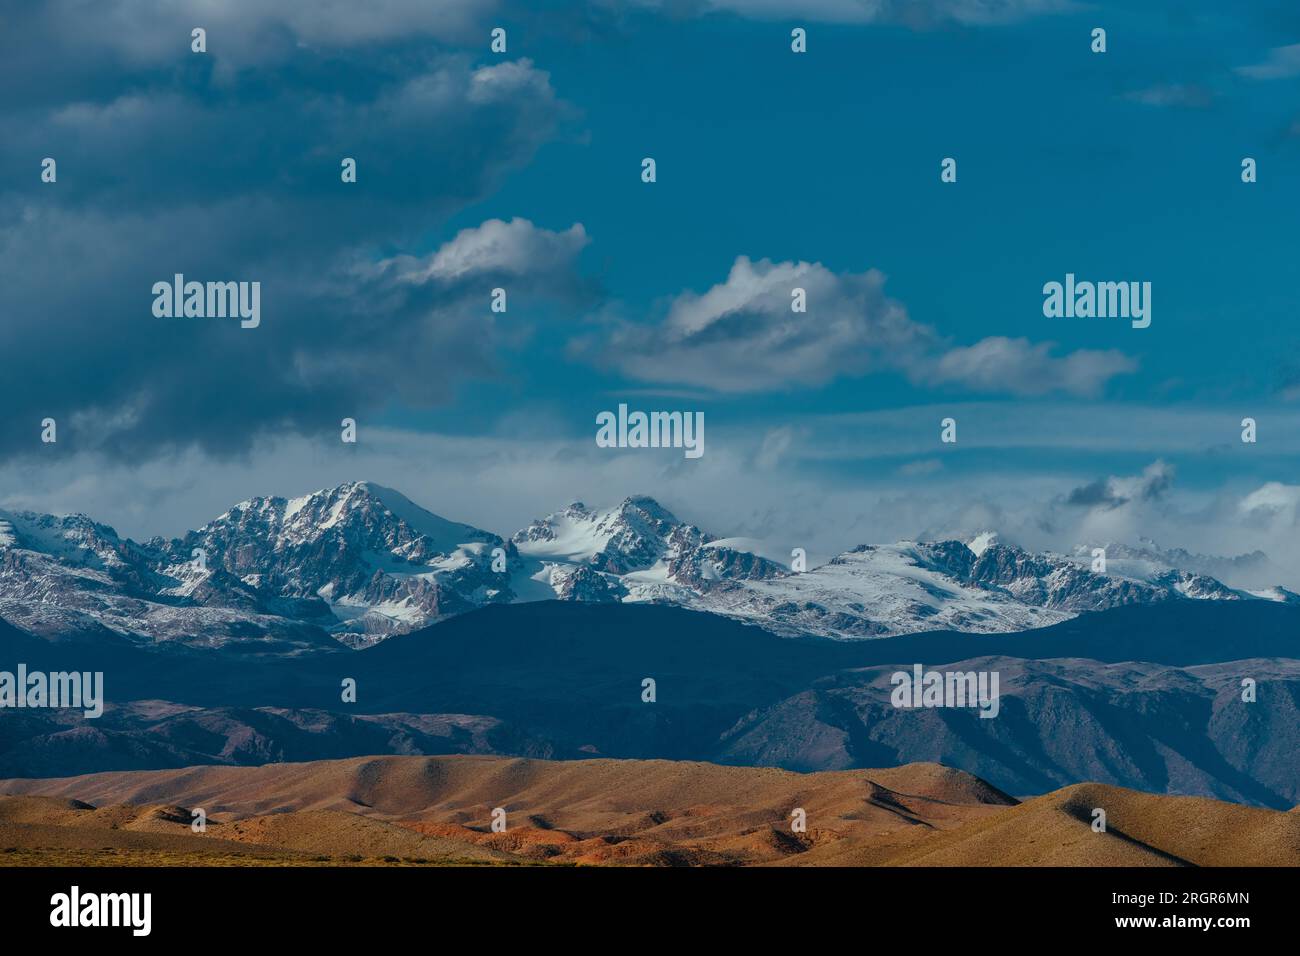 Beautiful mountains landscape with snowy peaks, Kyrgyzstan Stock Photo